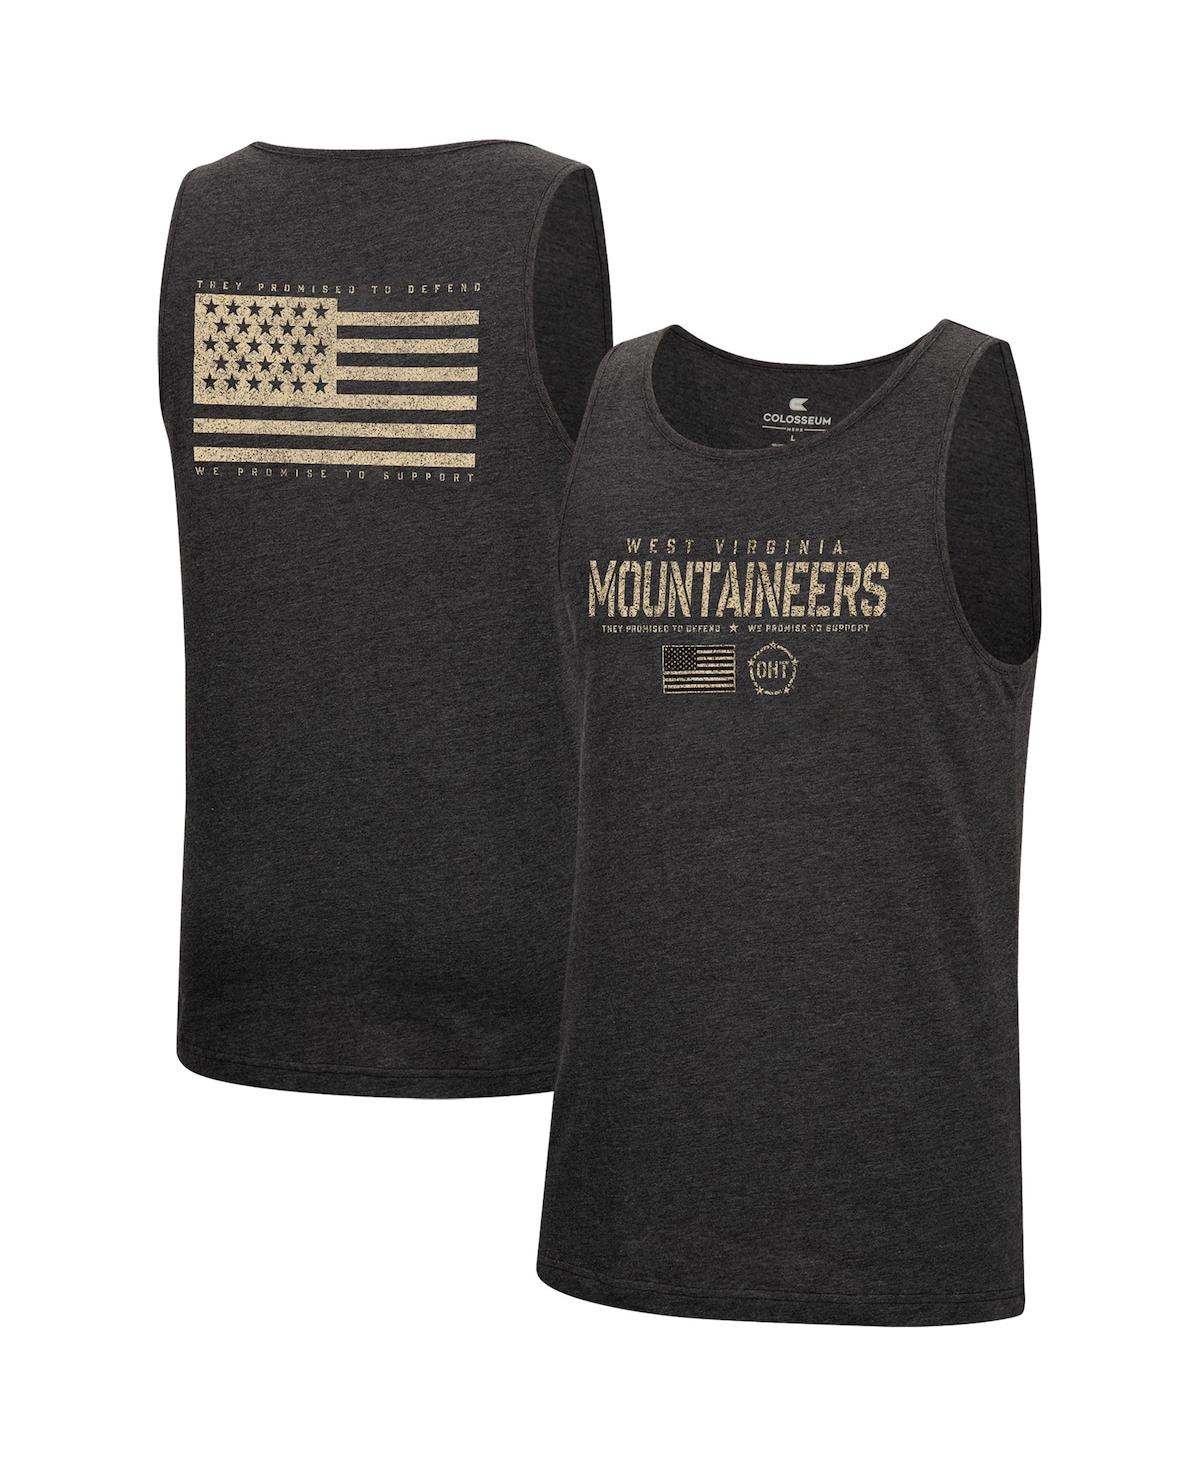 COLOSSEUM MEN'S COLOSSEUM HEATHERED BLACK WEST VIRGINIA MOUNTAINEERS MILITARY-INSPIRED APPRECIATION OHT TRANSP